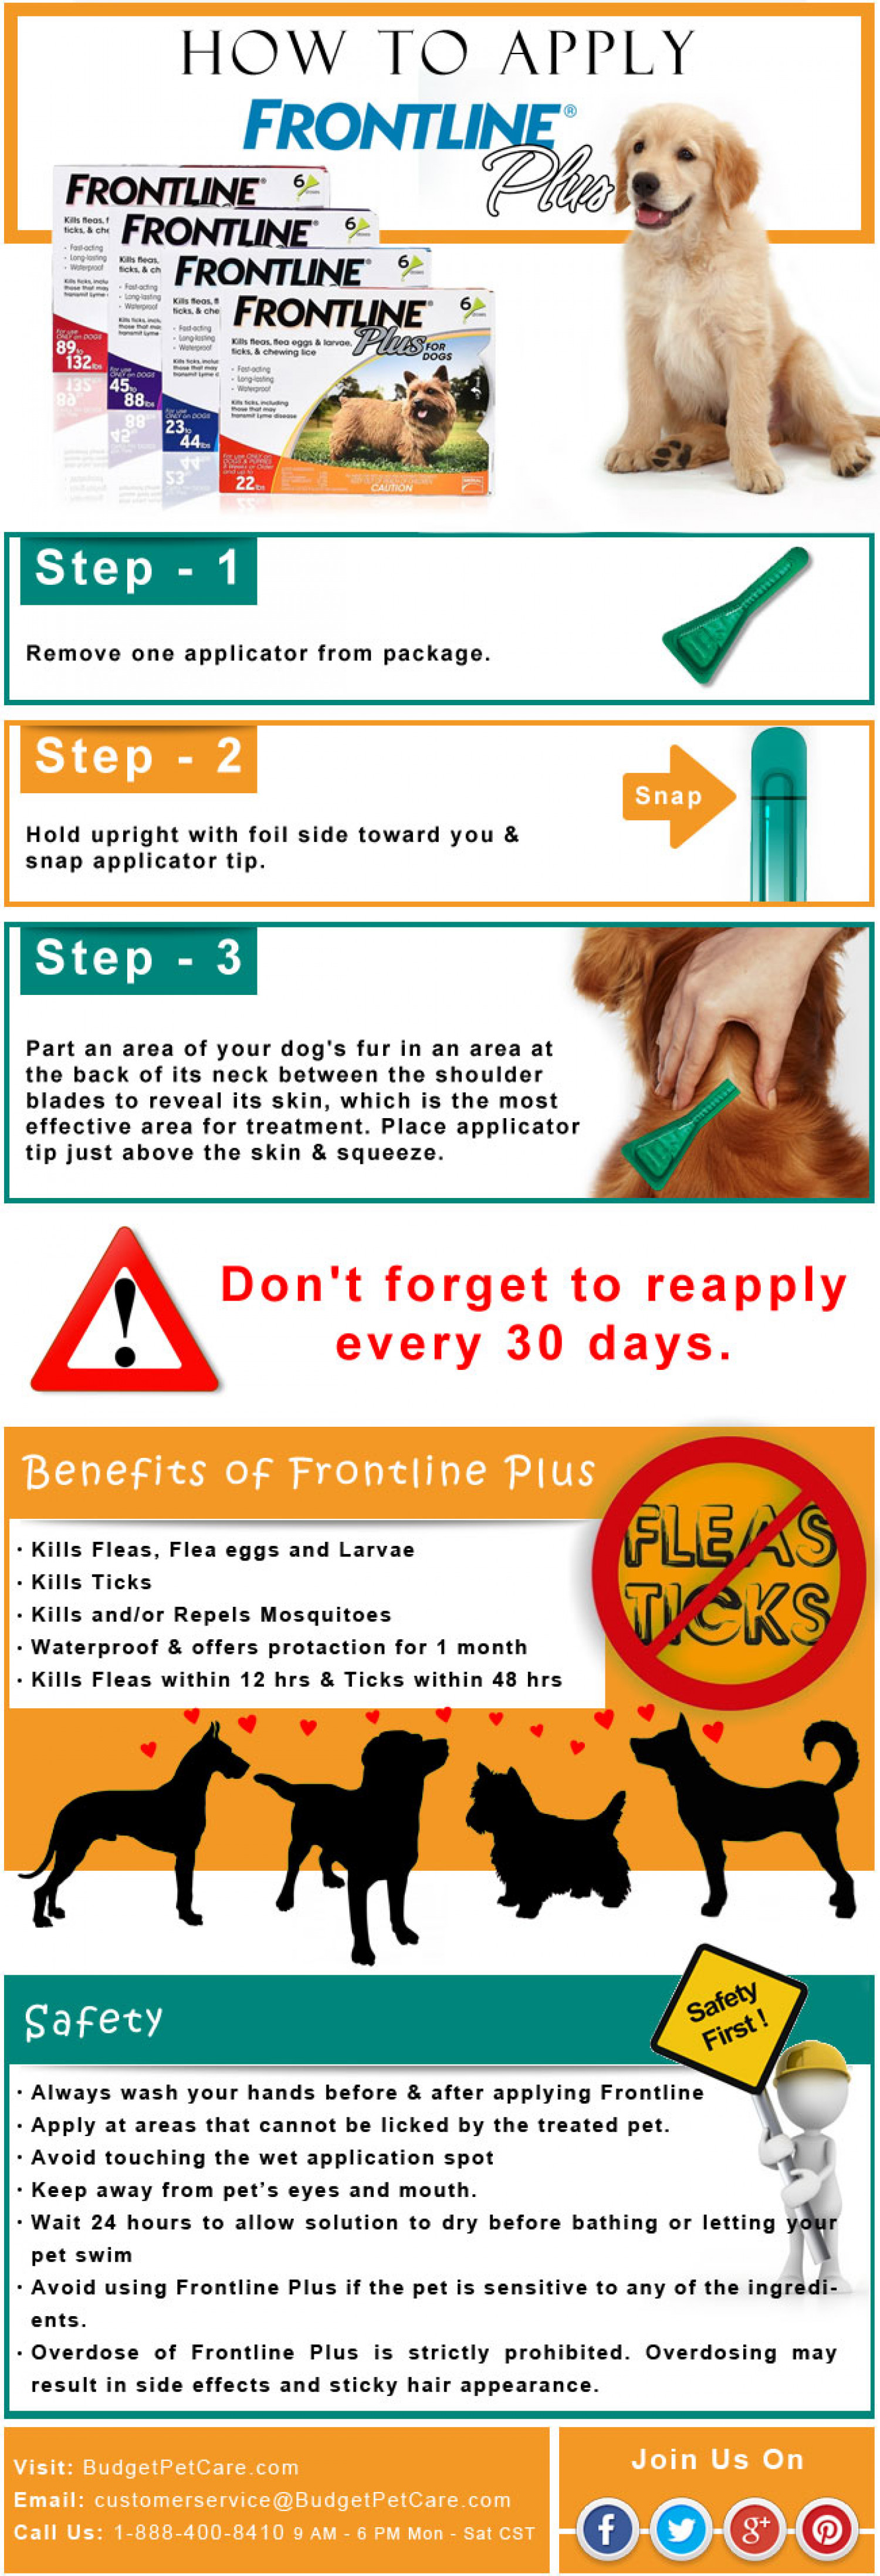 How to Apply Frontline Plus on Dogs Infographic